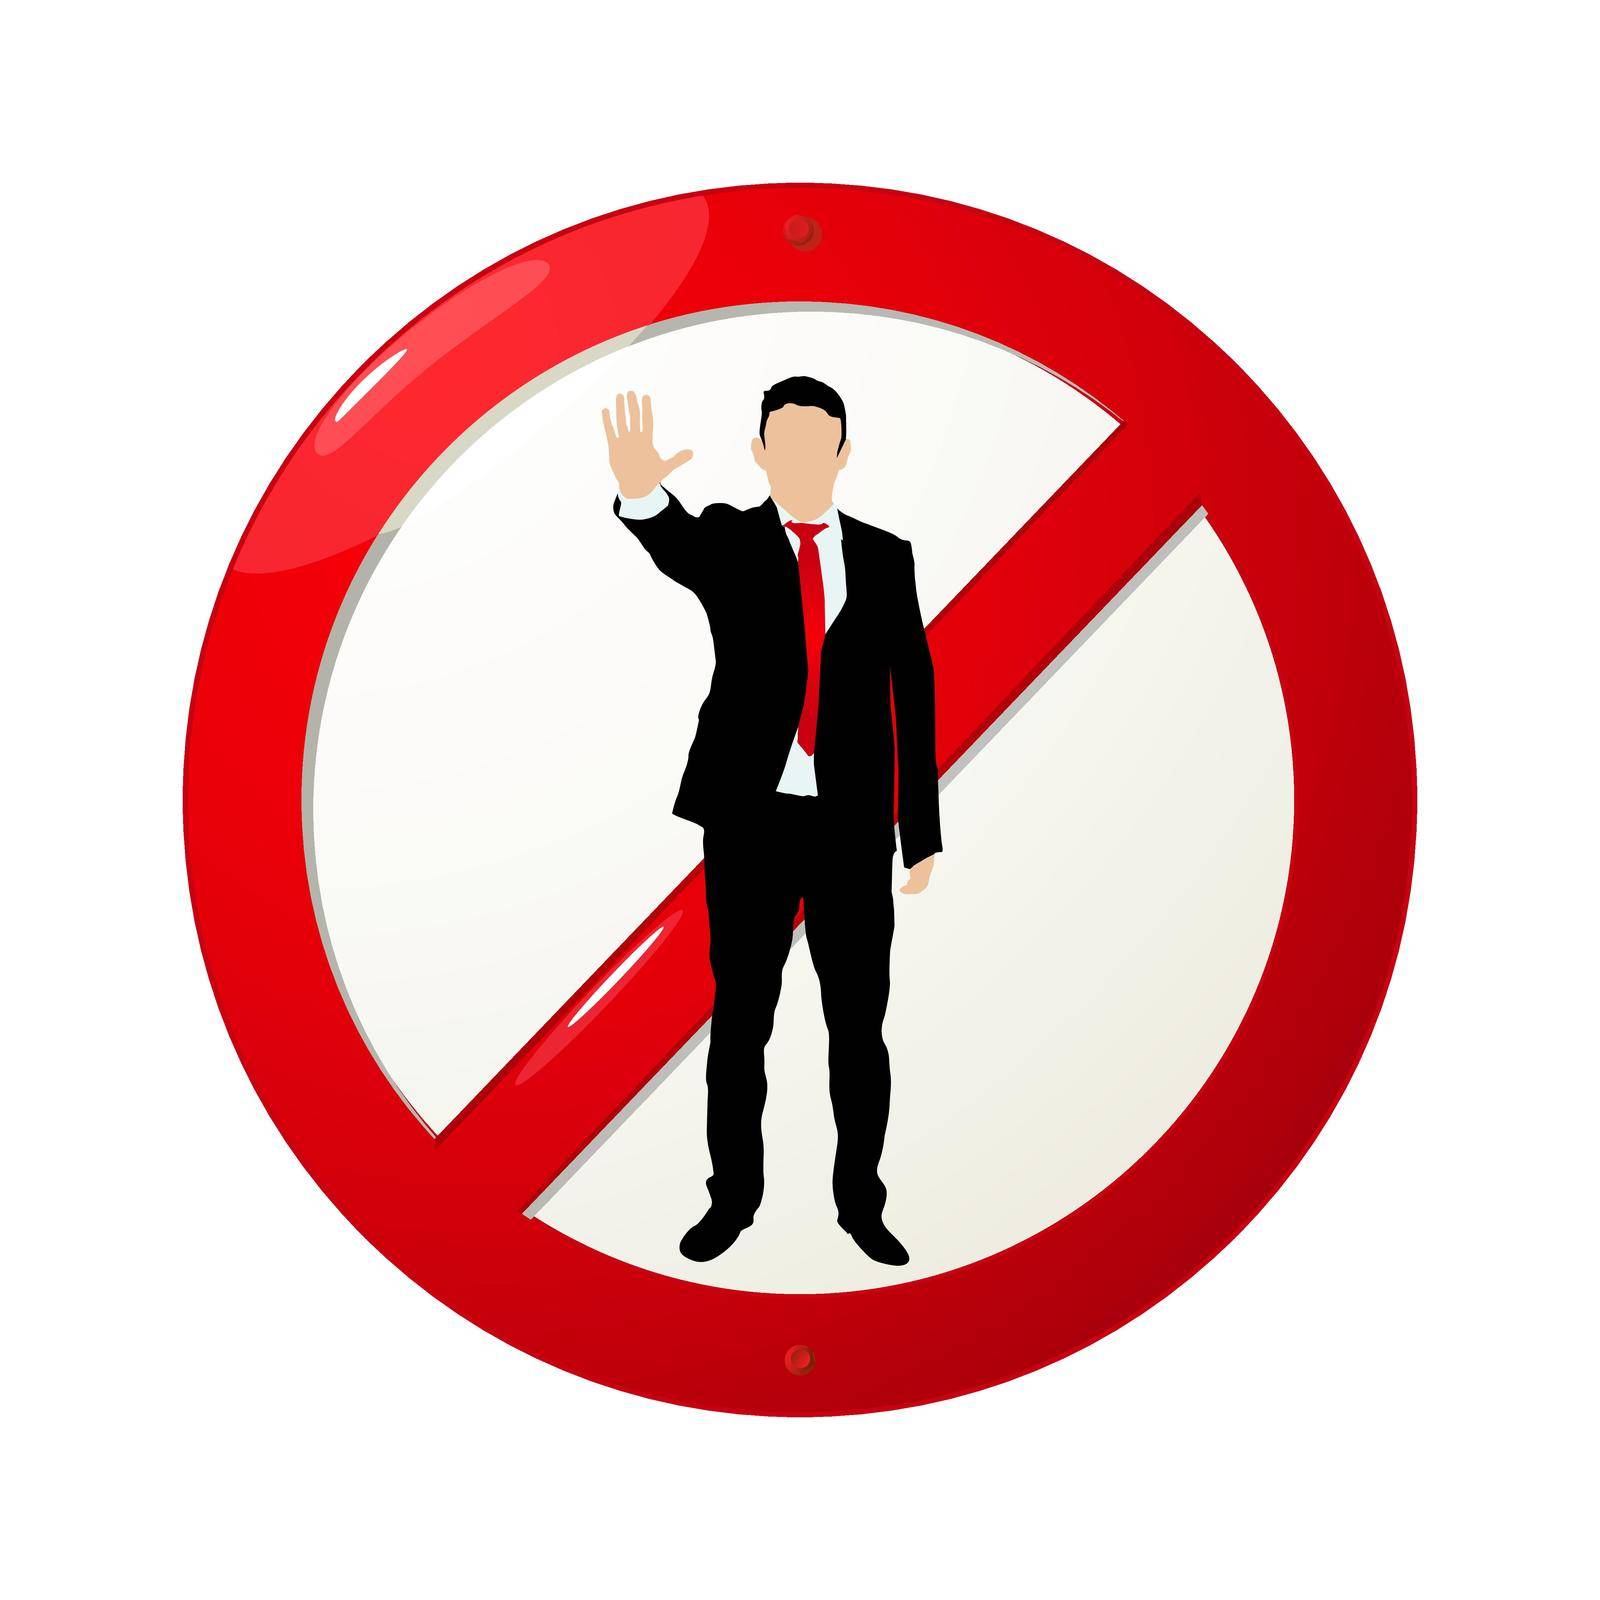 No business sign, symbol with a men in suit and tie over a stop sign, isolated vector objects over white background